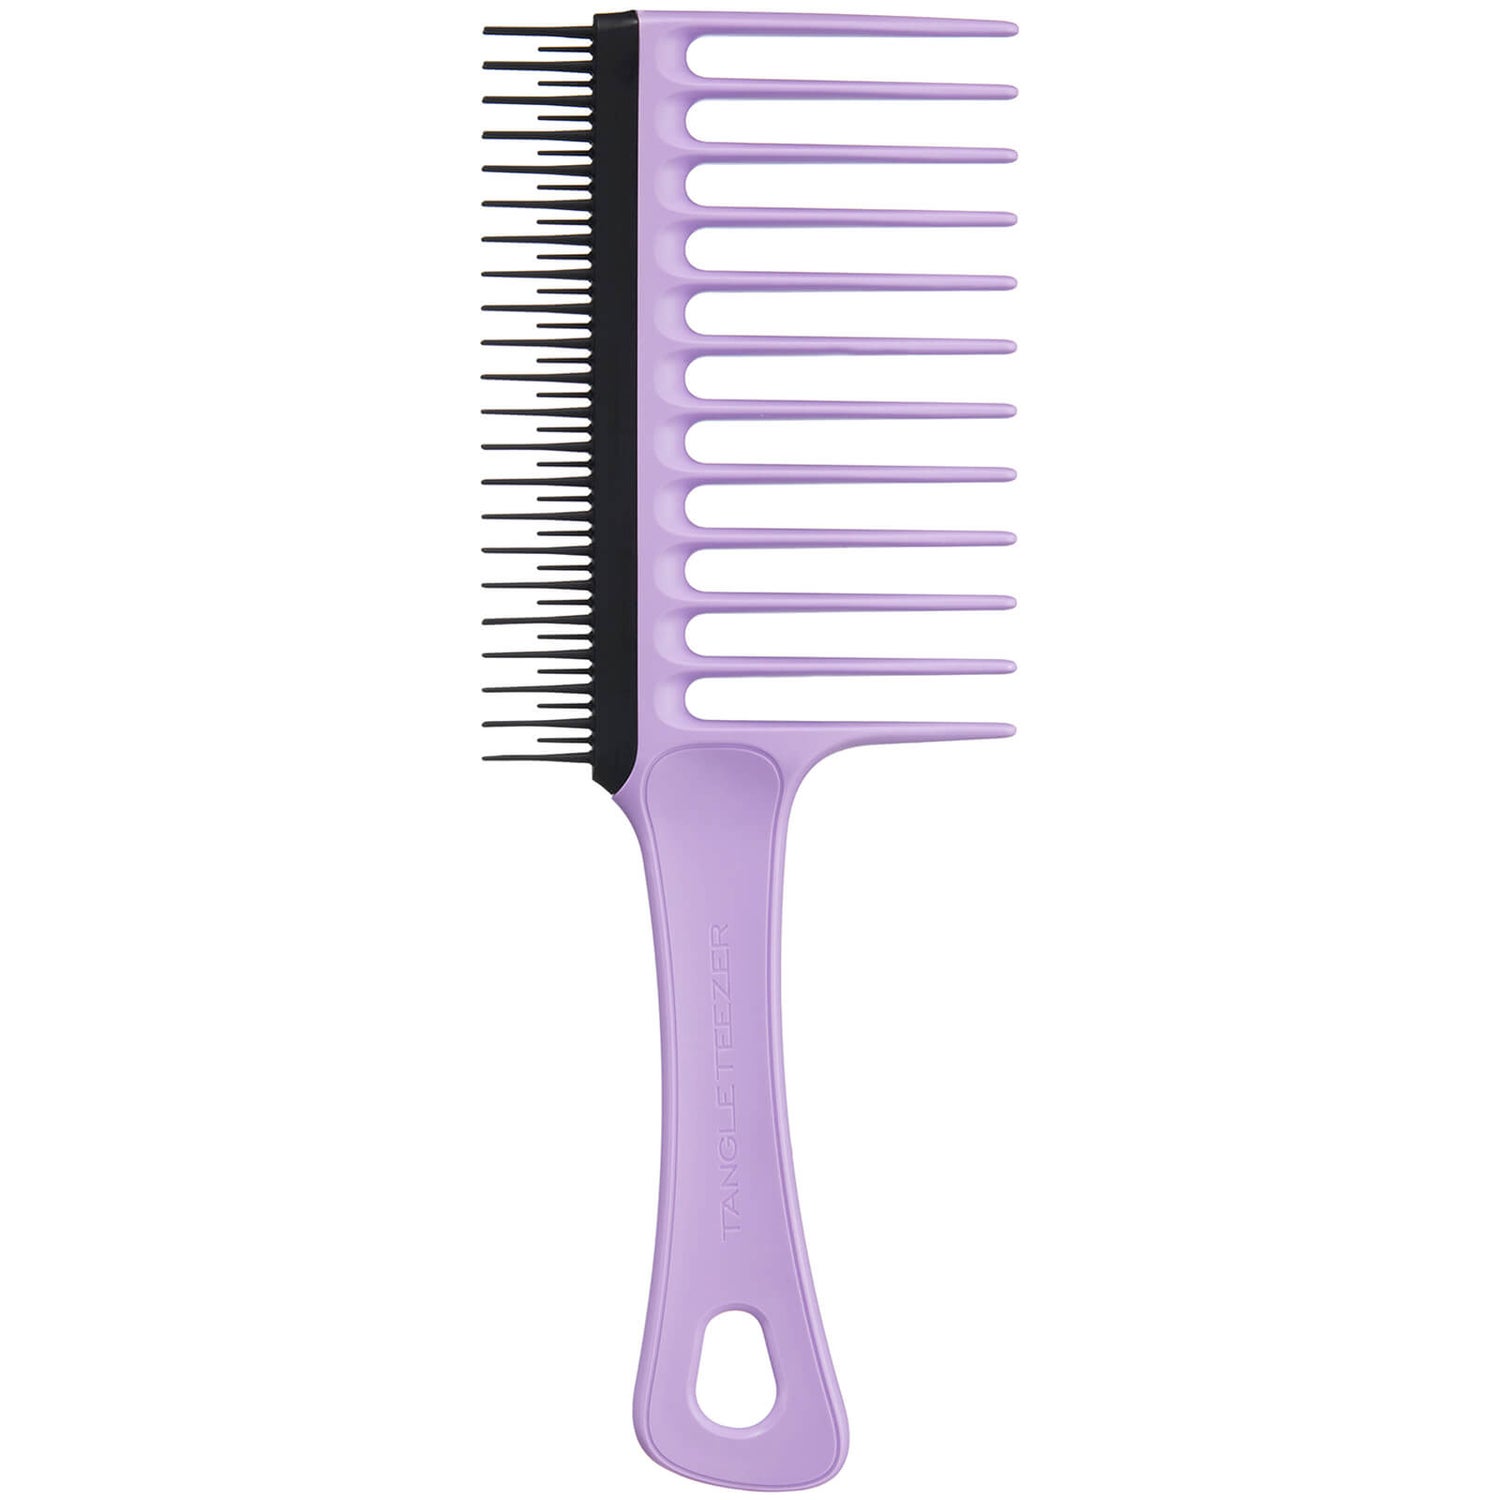 Tangle Teezer Wide Tooth Comb - Lilac